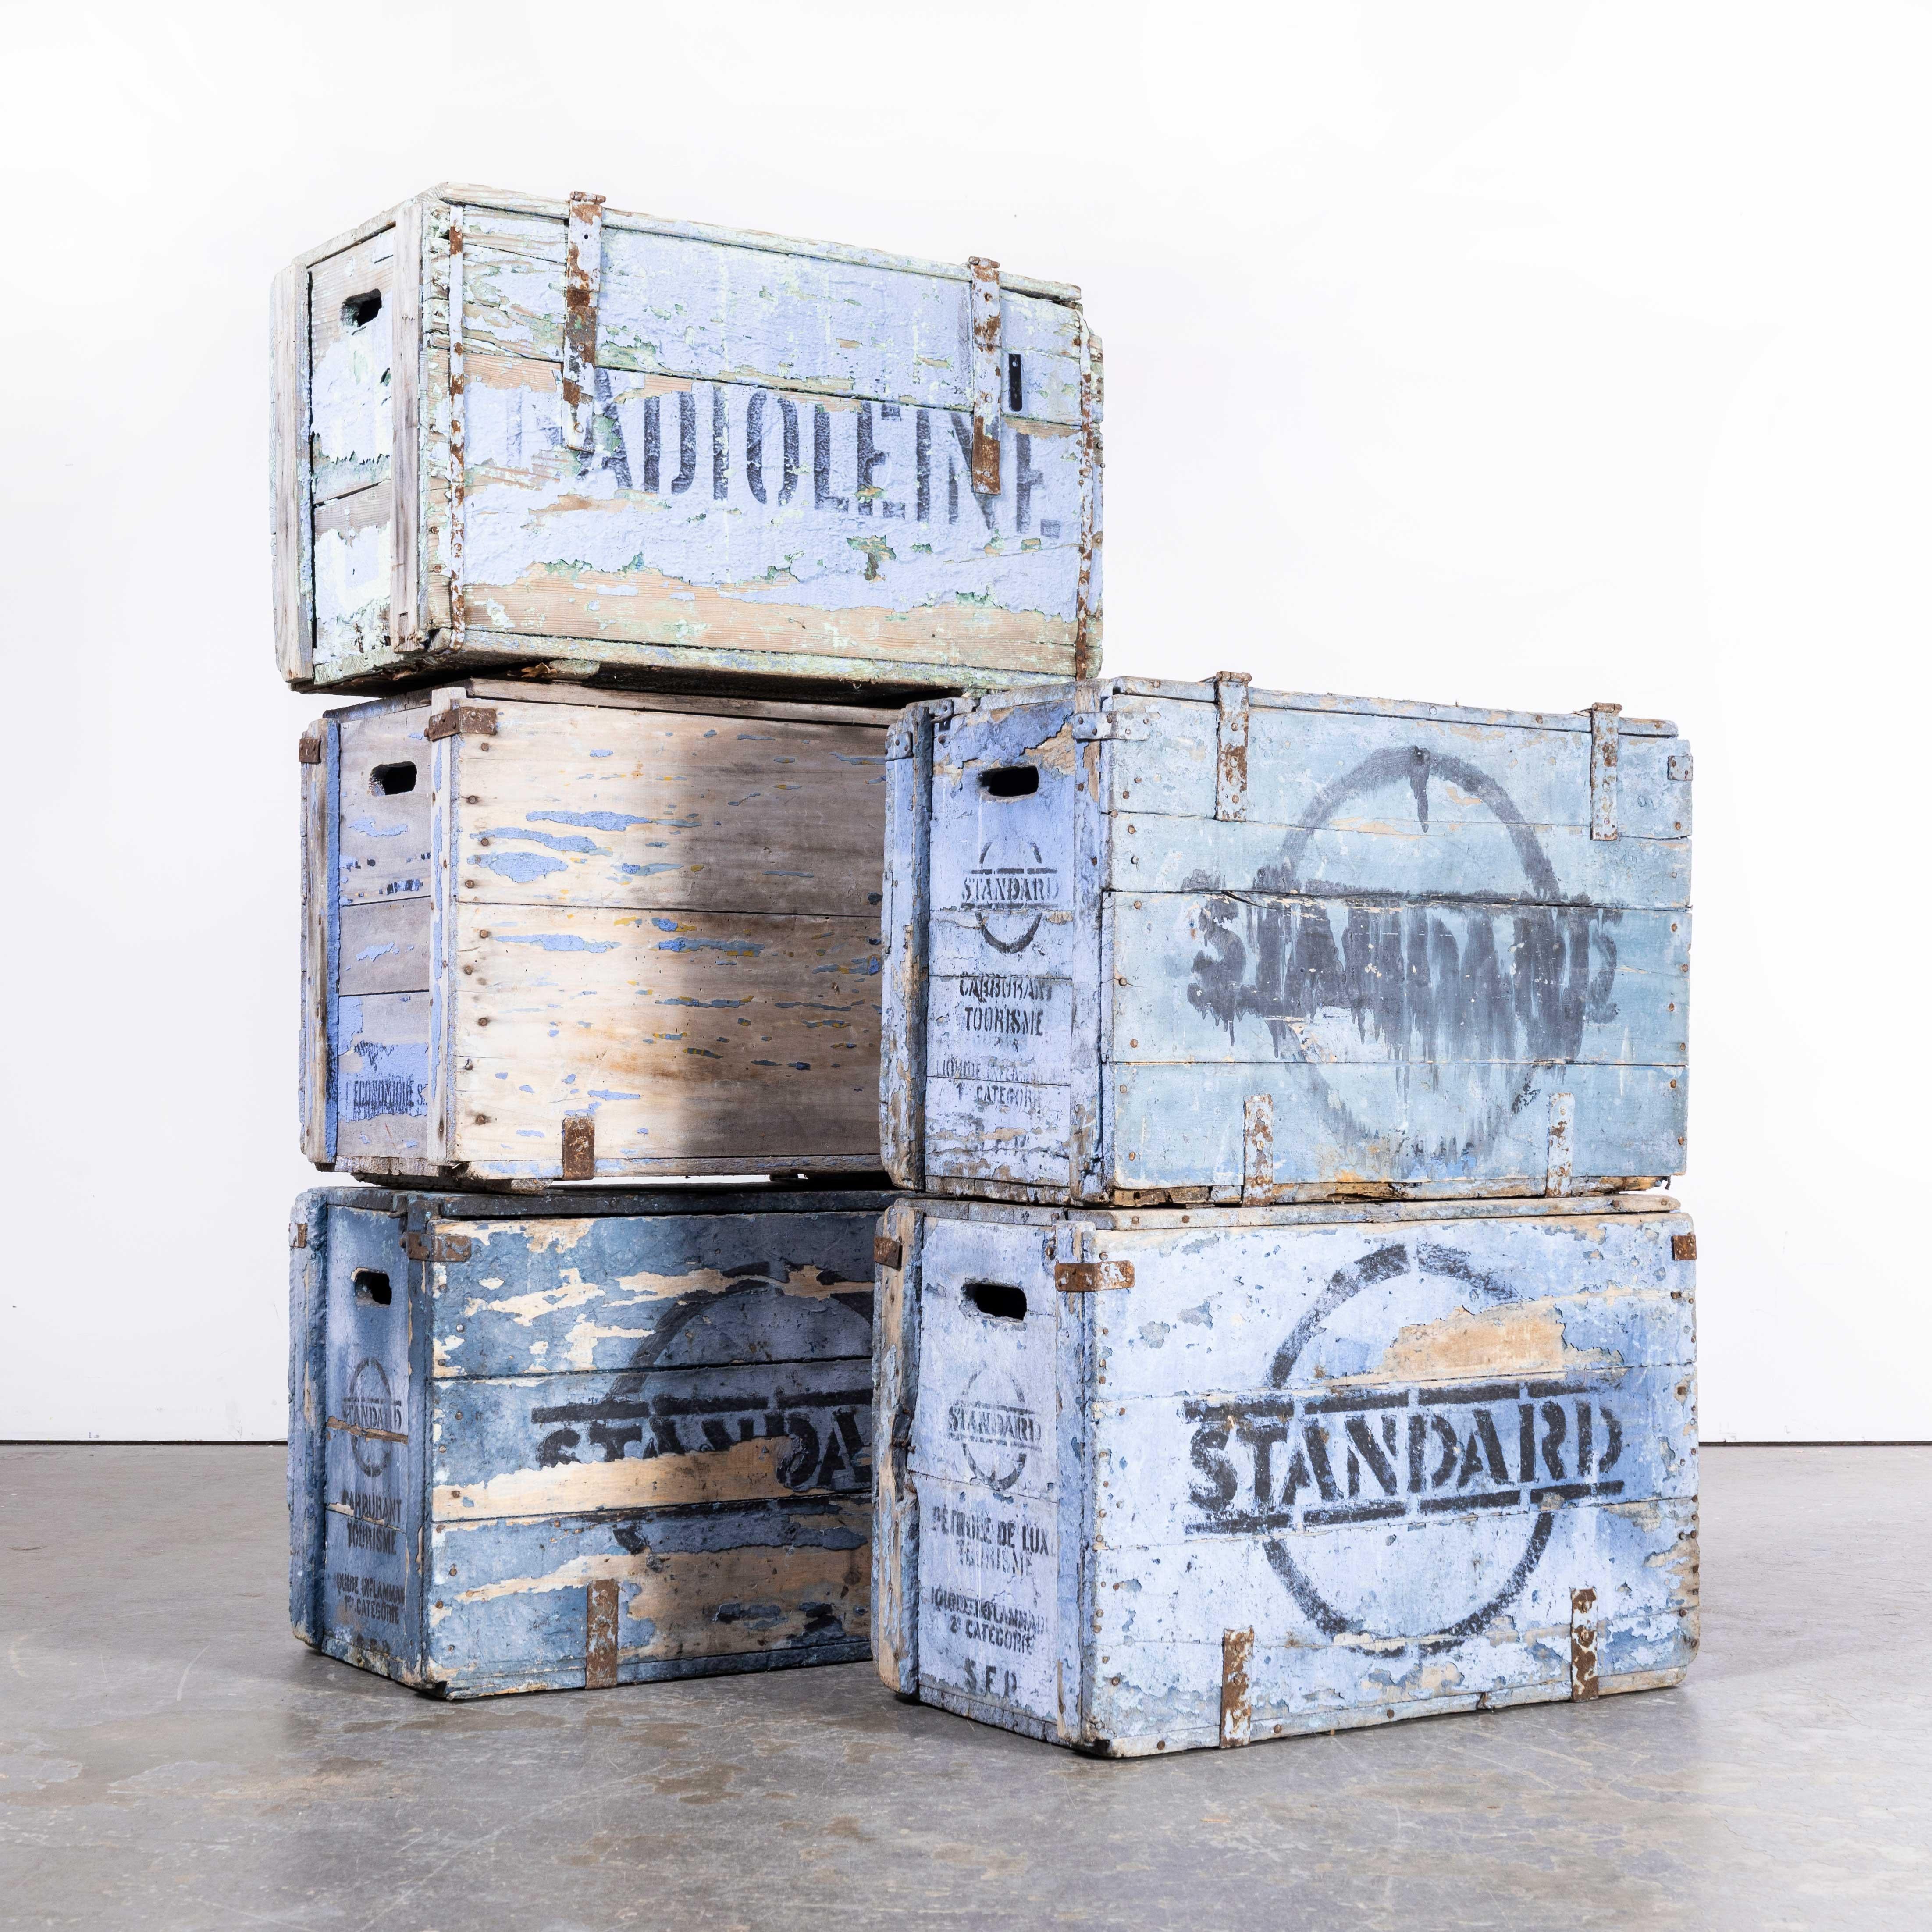 1920s Belgian Dusty Blue Hinged Crates
1920s Belgian Dusty Blue Hinged Crates. Highly unusual and early crates from the 1920s. With a hinged lid they were undoubtedly made as a shipping crates for transport. The crates retains the most superb